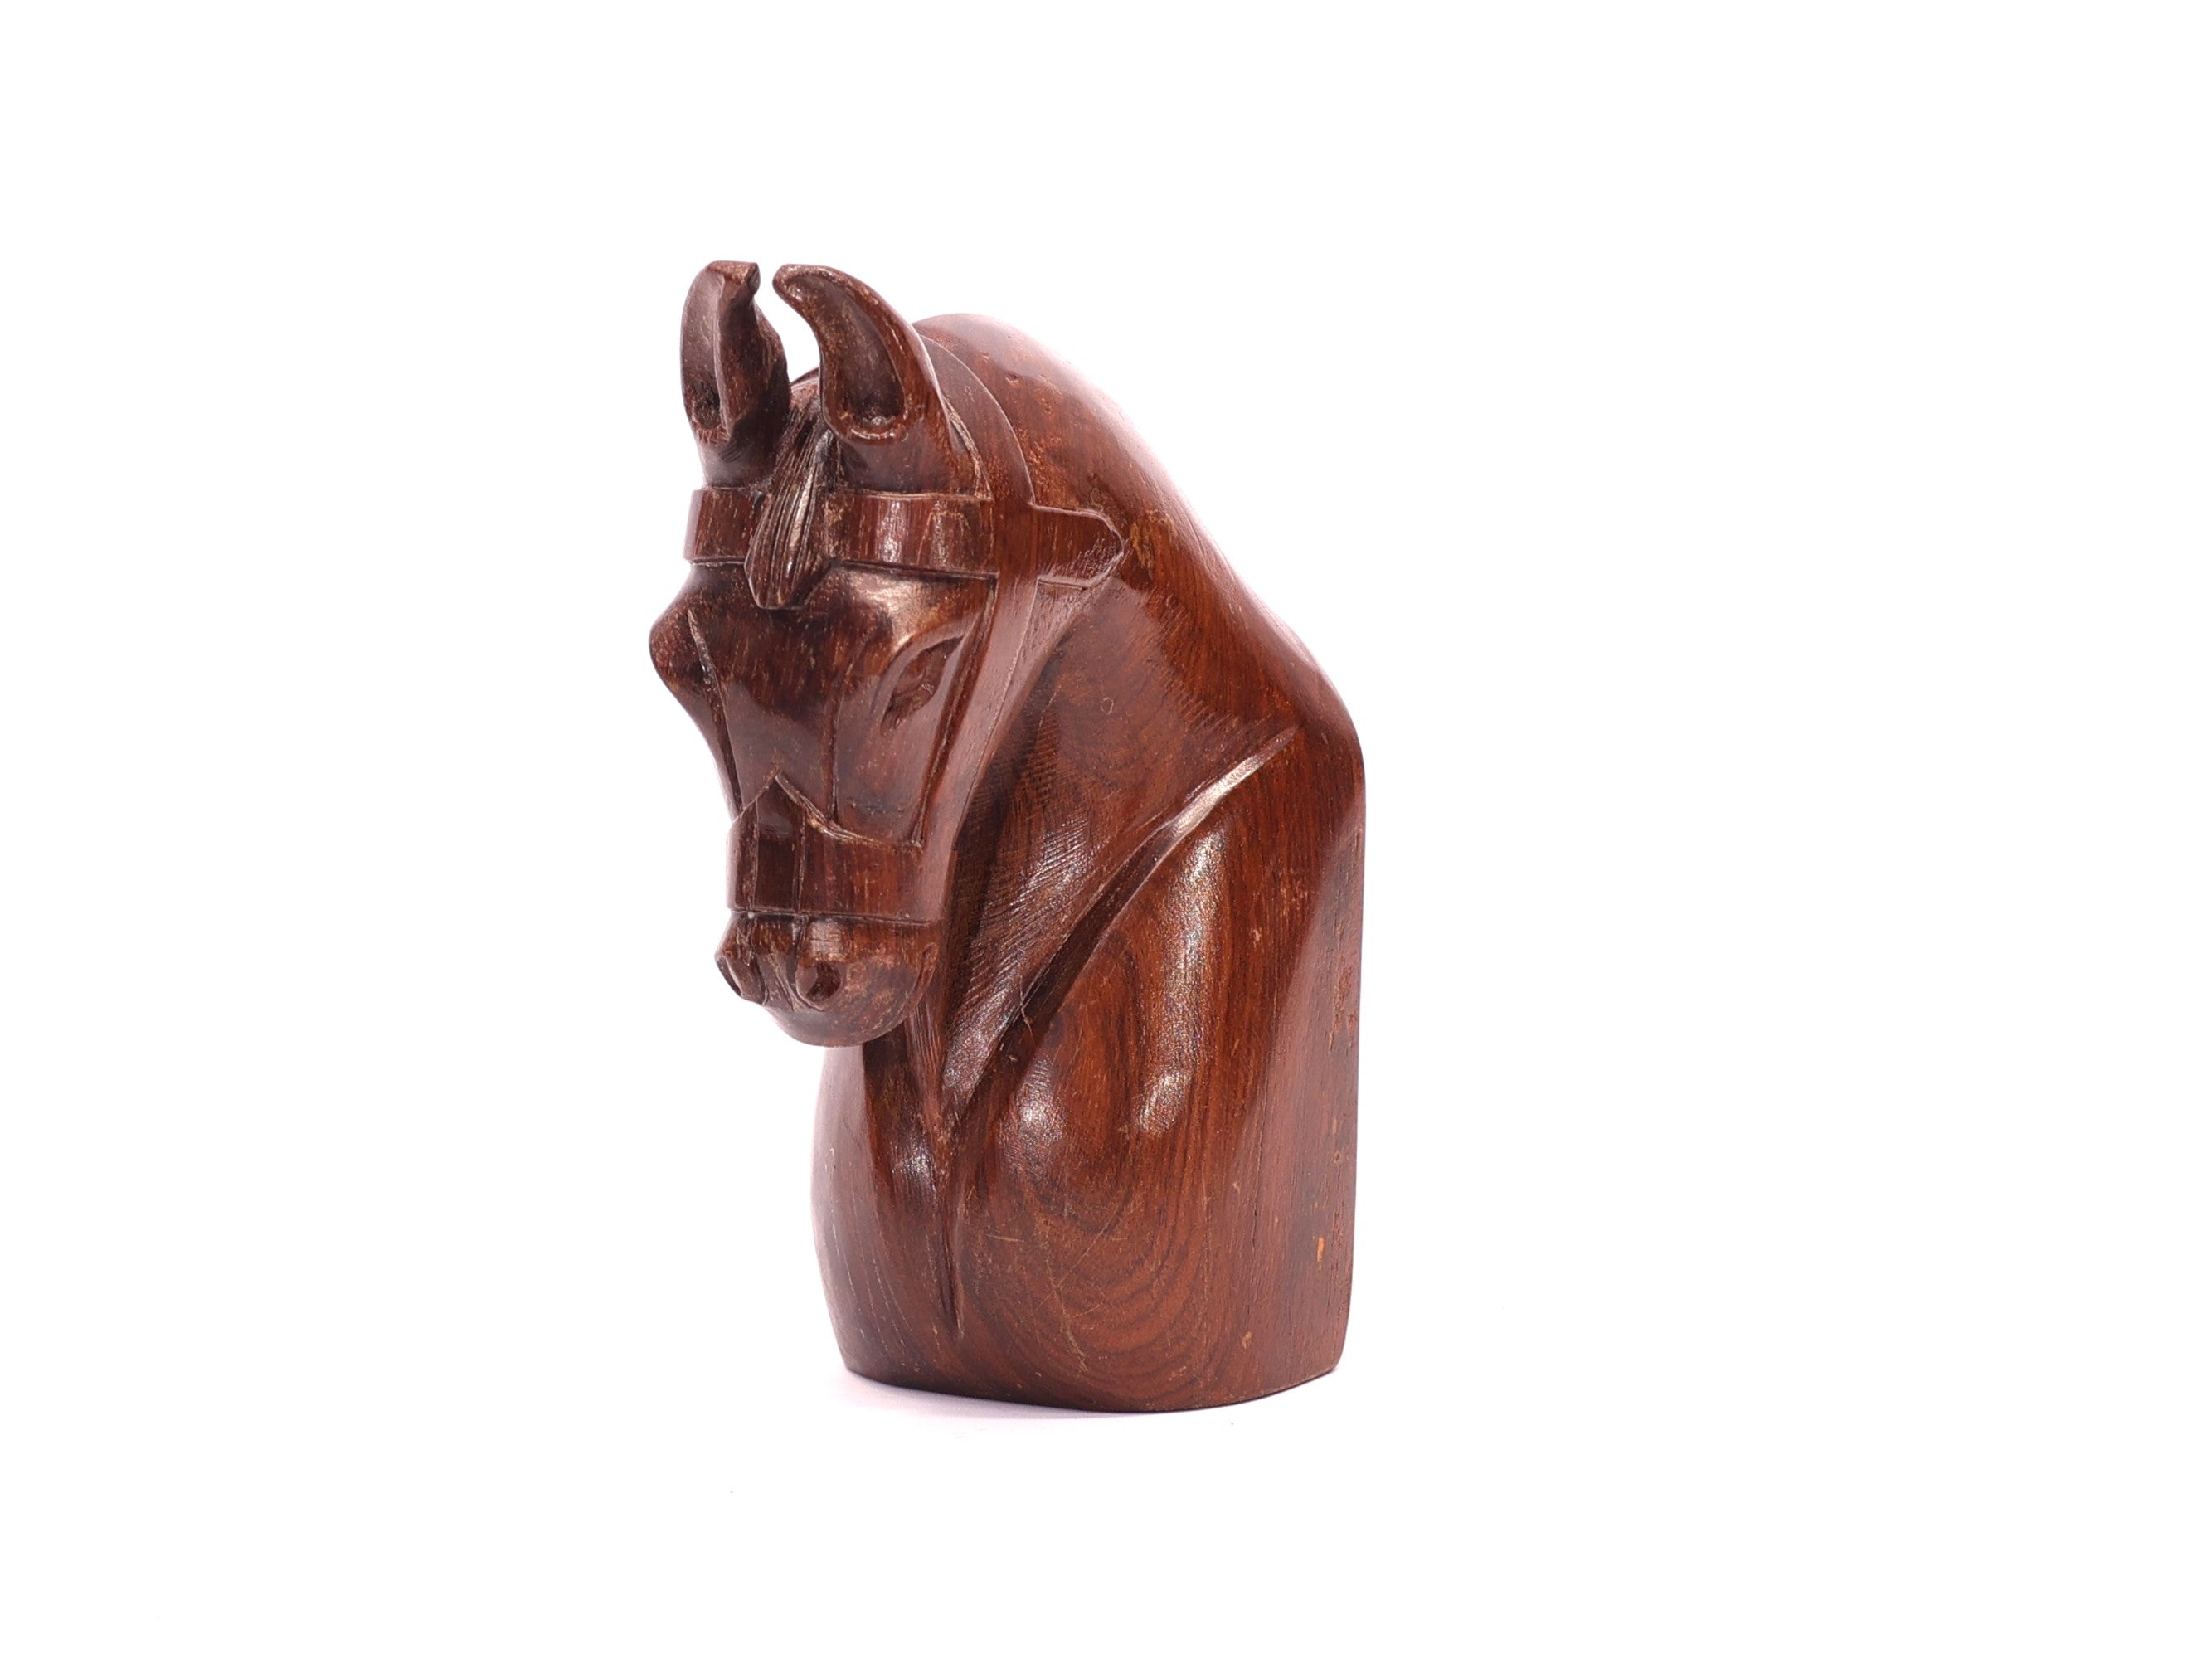 Wooden Horse Carving Animal Figurine